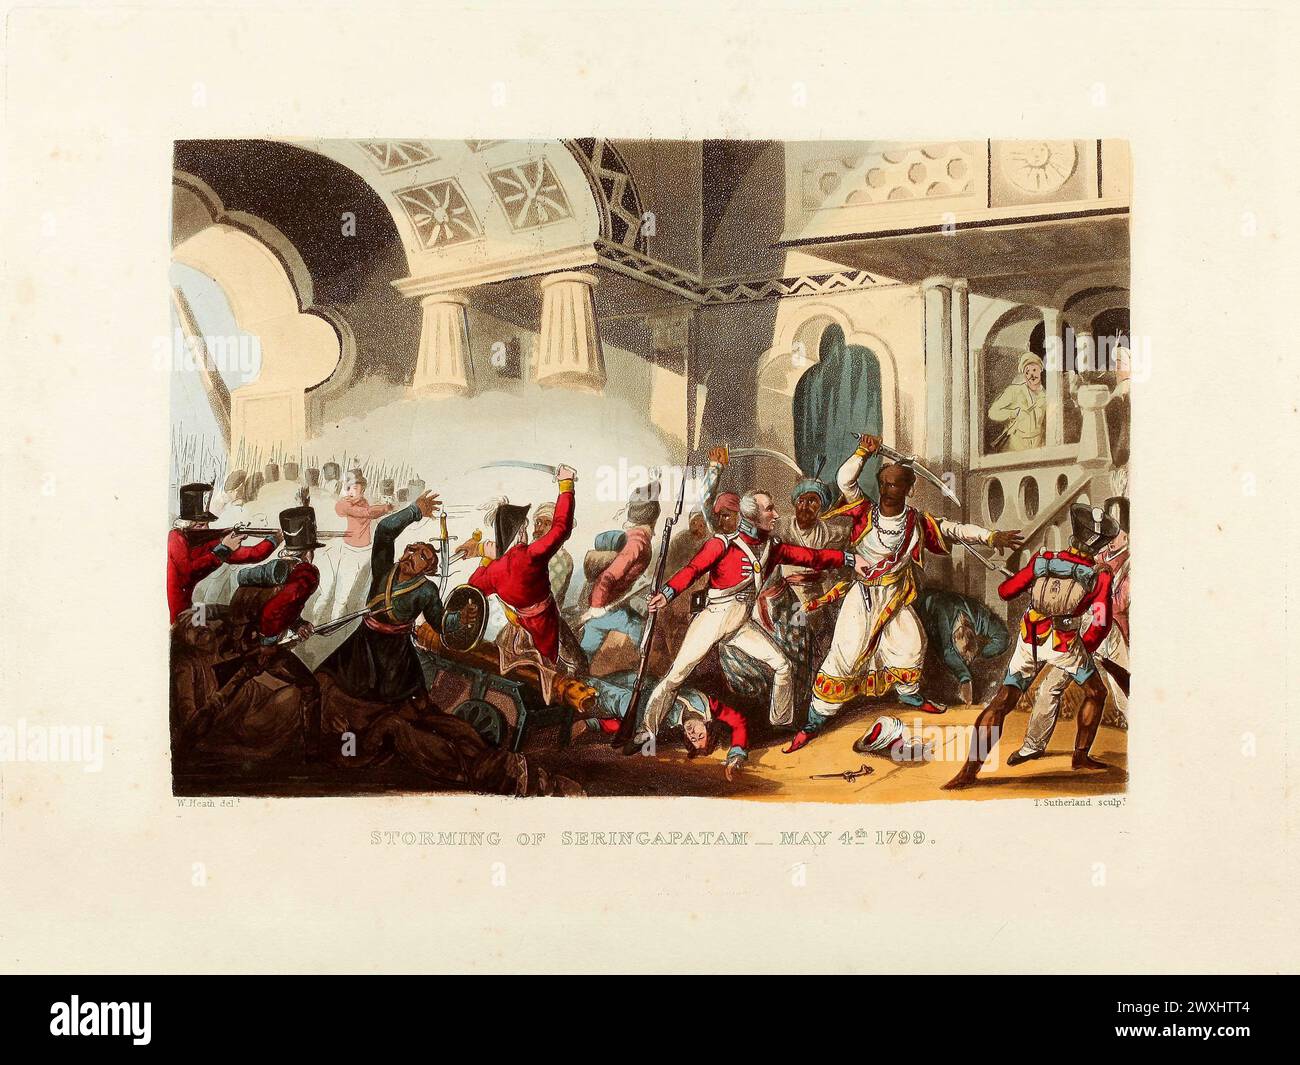 Storming of Seringapatam, May 4th 1799.  Vintage Coloured Aquatint, published by James Jenkins, 1815,  from  The martial achievements of Great Britain and her allies : from 1799 to 1815. Stock Photo